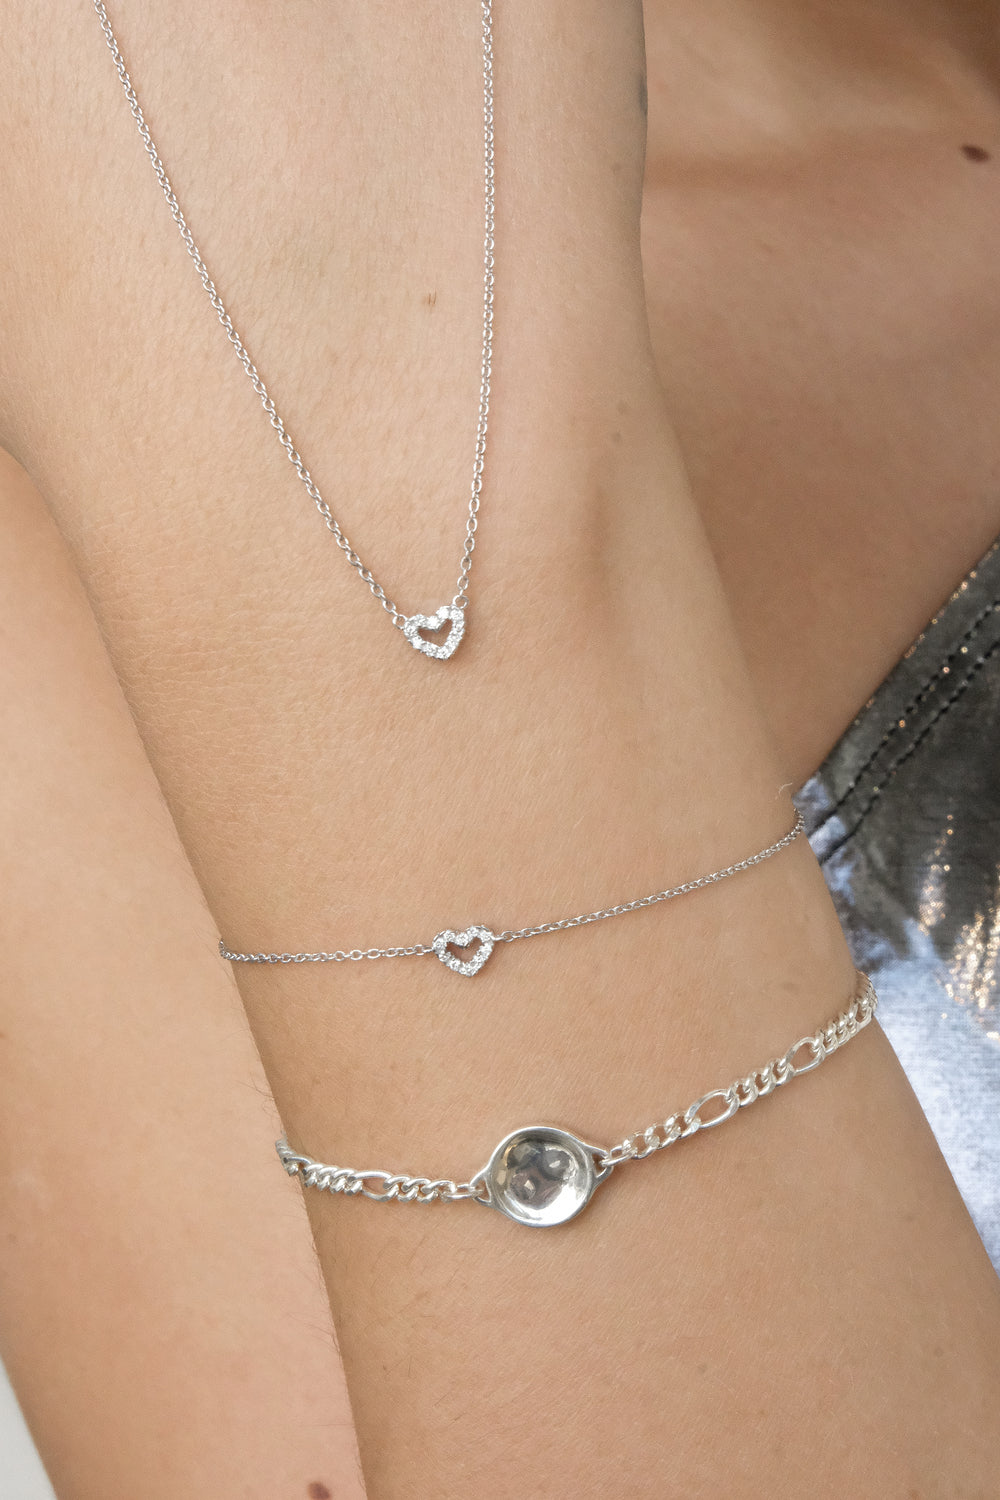 Solid Gold Diamond Heart Necklace - White Gold